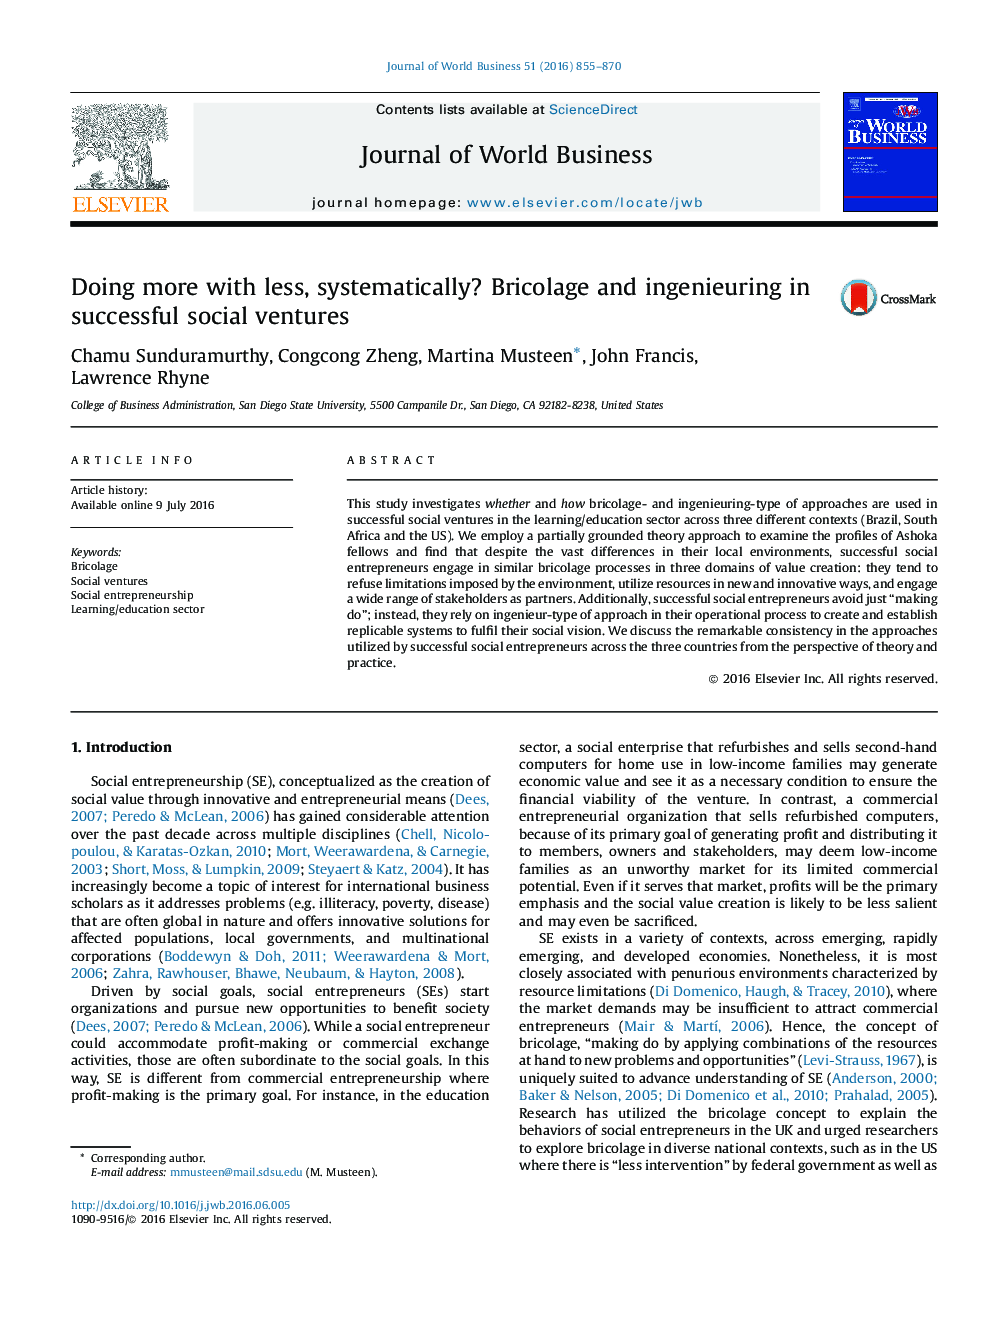 Doing more with less, systematically? Bricolage and ingenieuring in successful social ventures